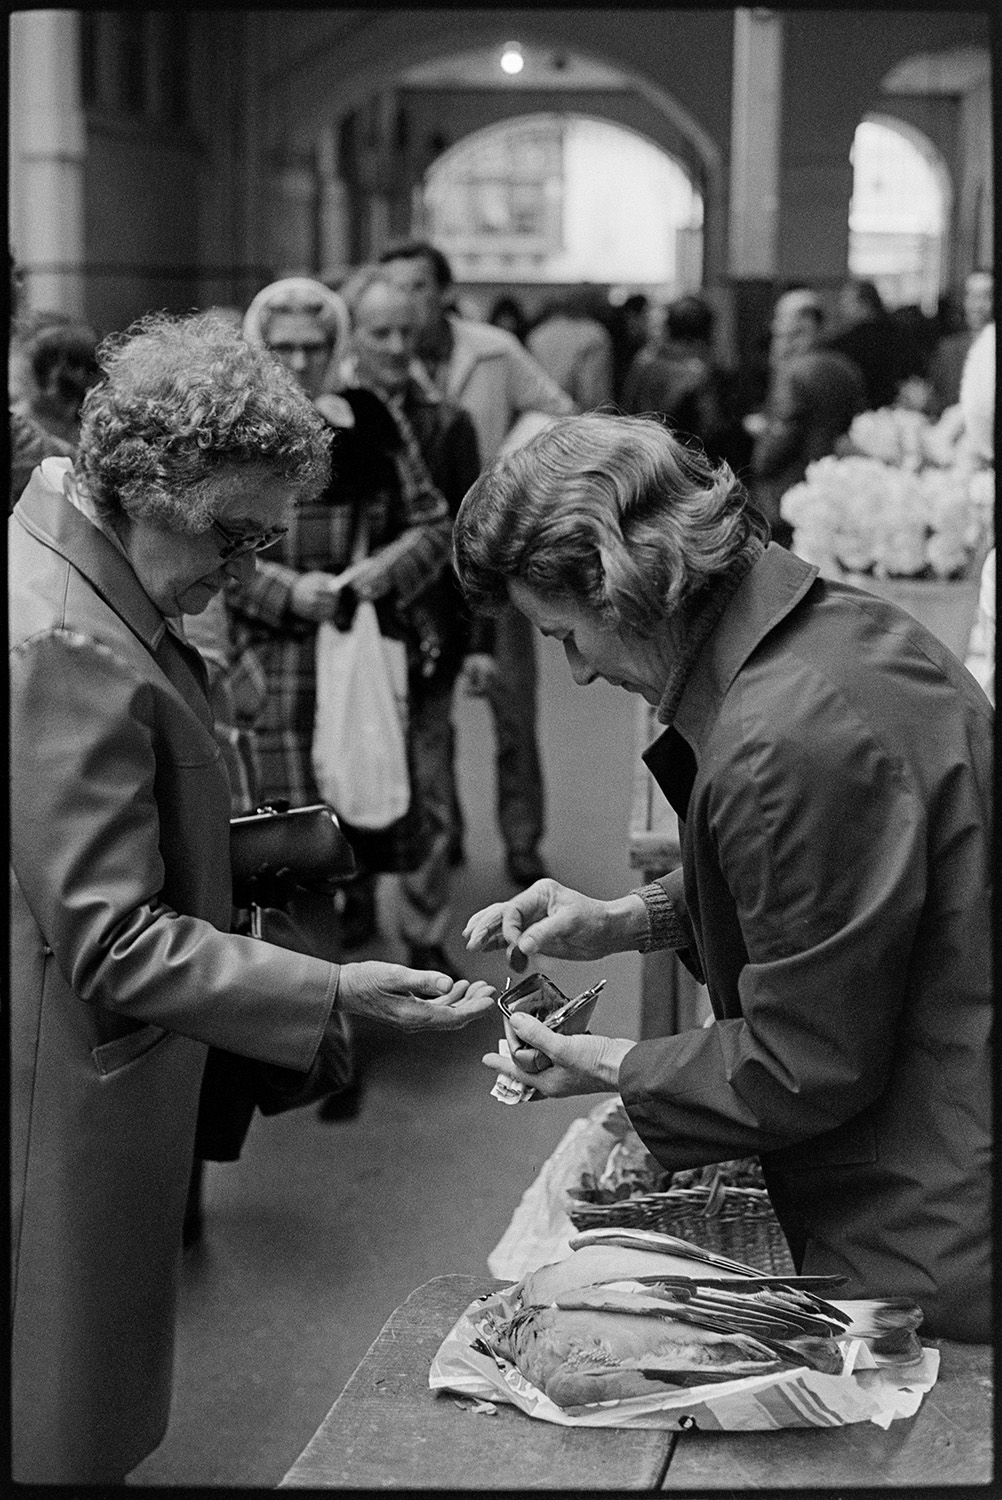 British Legion and other stalls in Pannier Market. 
[A woman giving a customer change for an item she has bought from her stall in Barnstaple Pannier Market. Two birds, possibly pigeons, can be seen on the stall.]